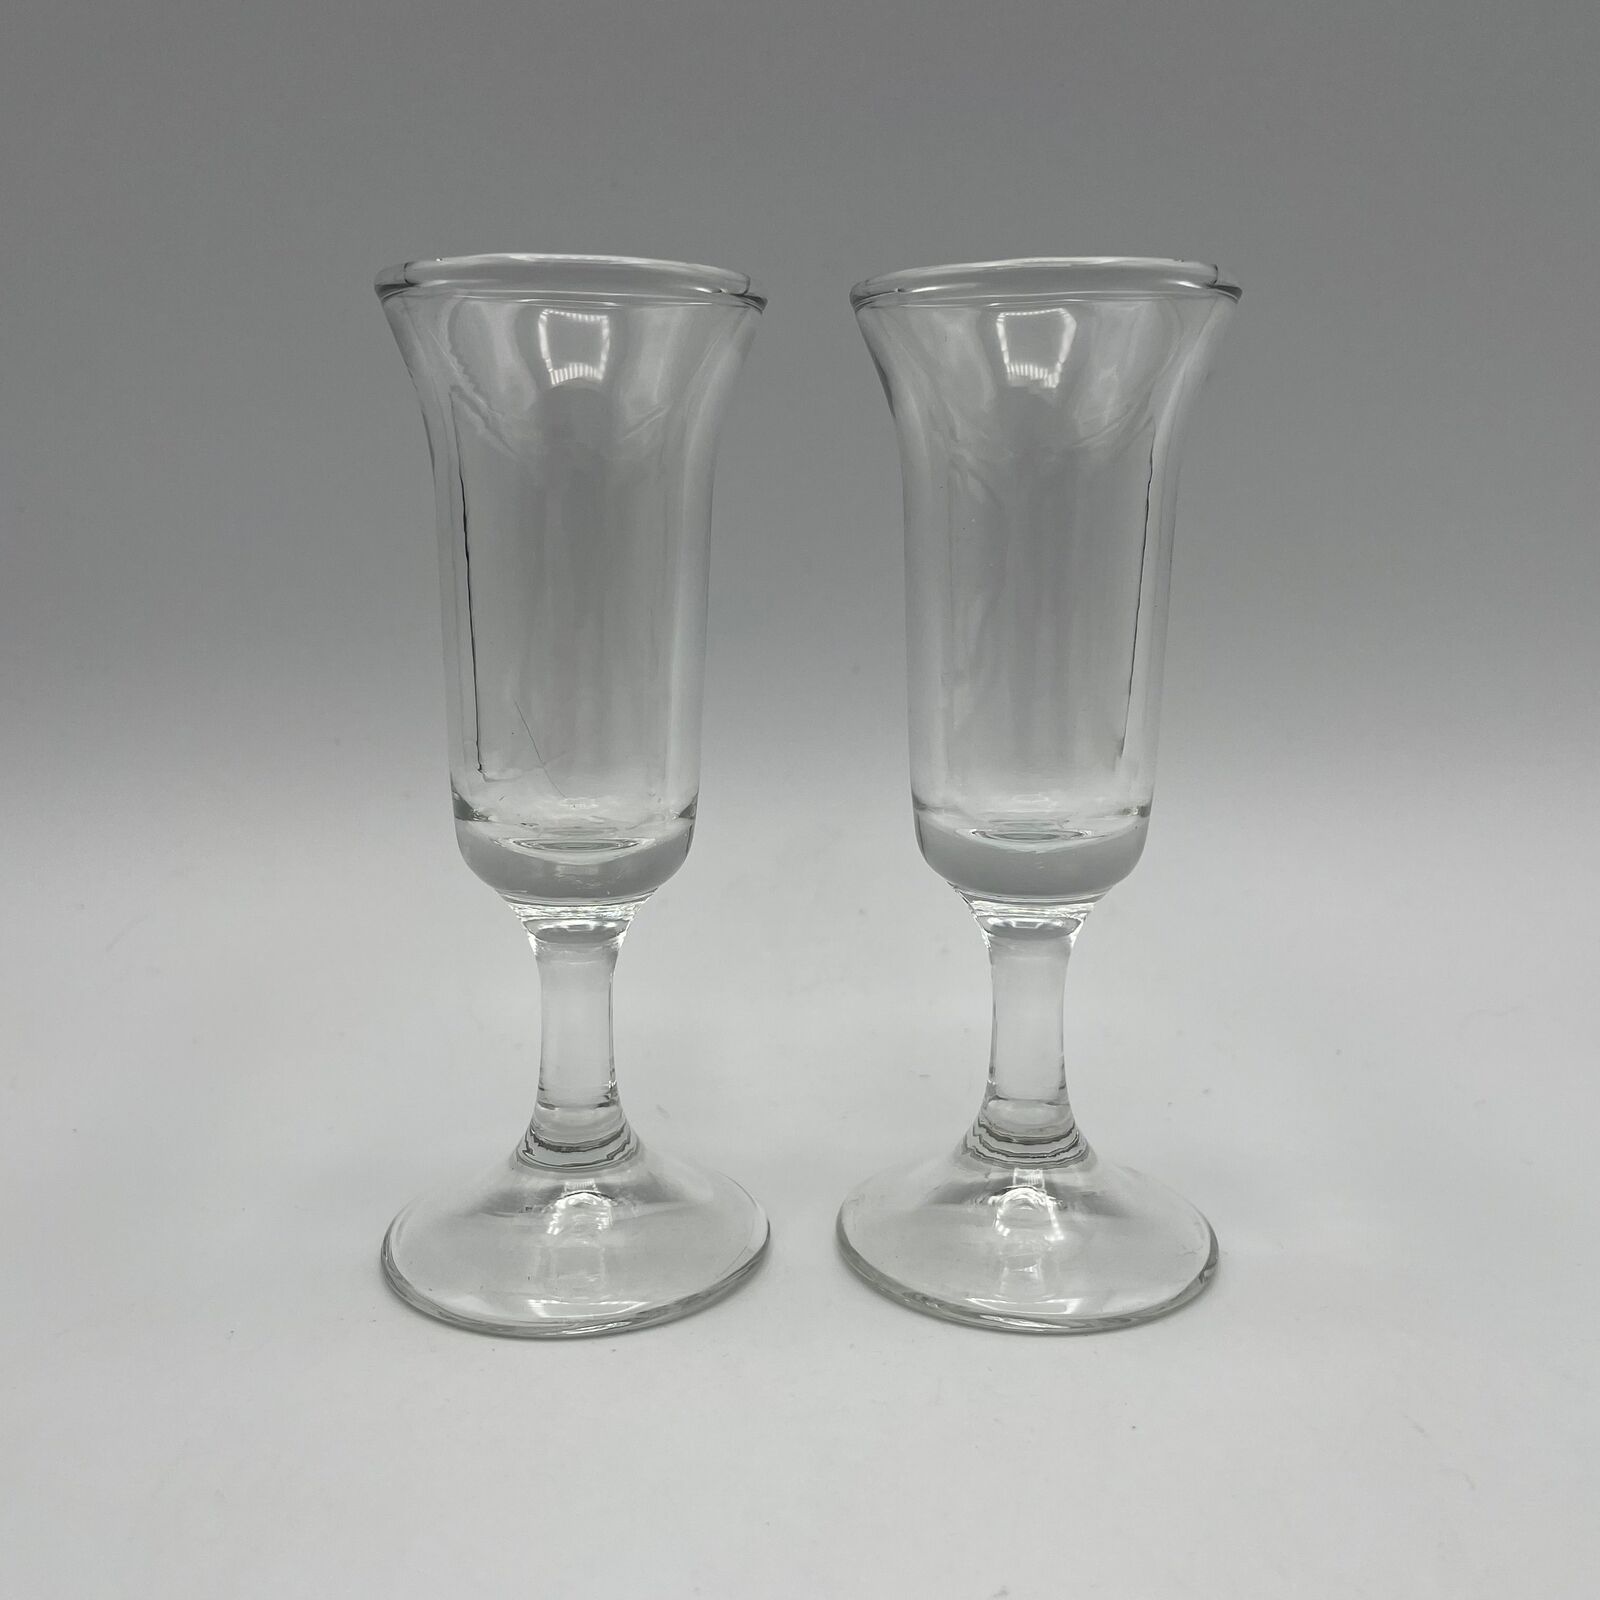 Libbey  Embassy 1oz Cordial Glass, Tulip Shapped, Set of 2